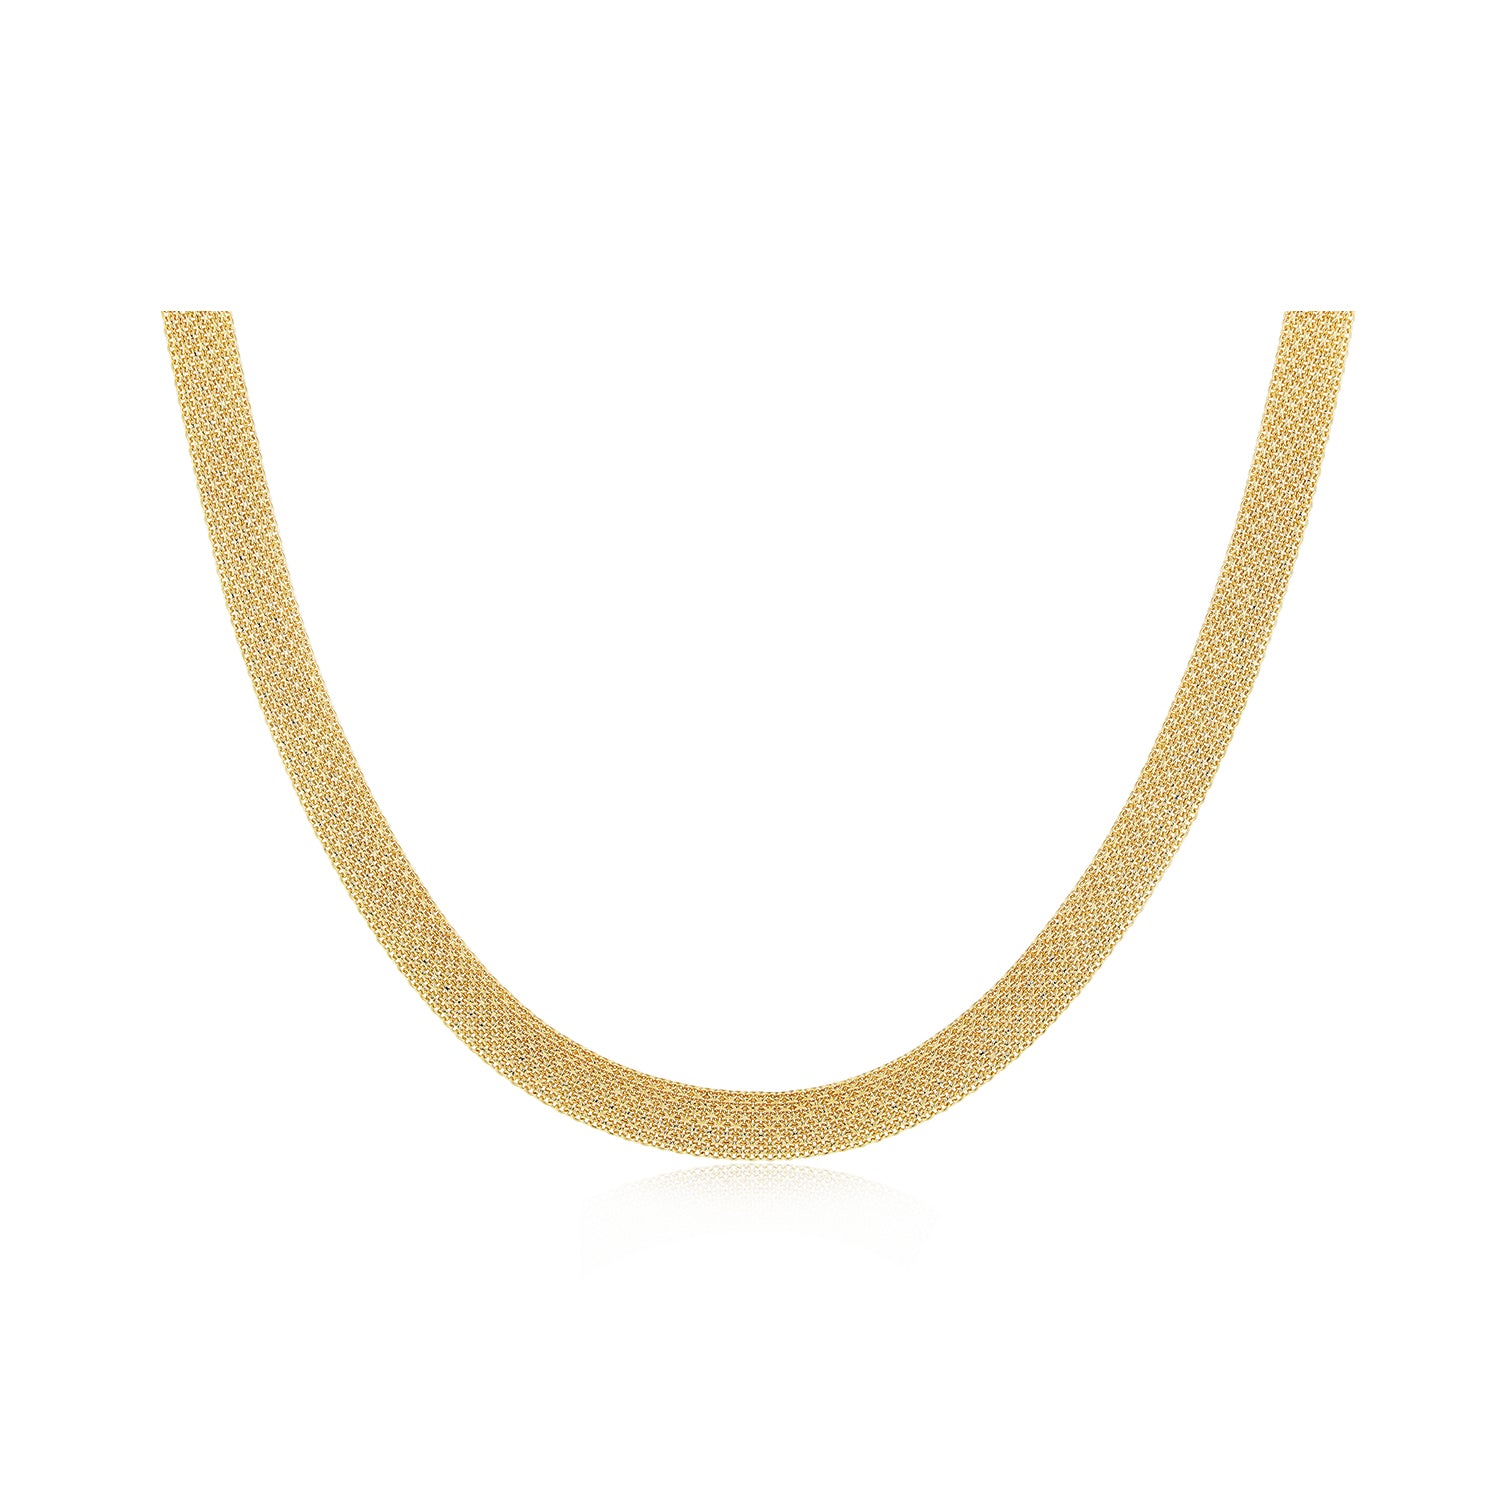 Gold Mesh Scarf Necklace, 14K